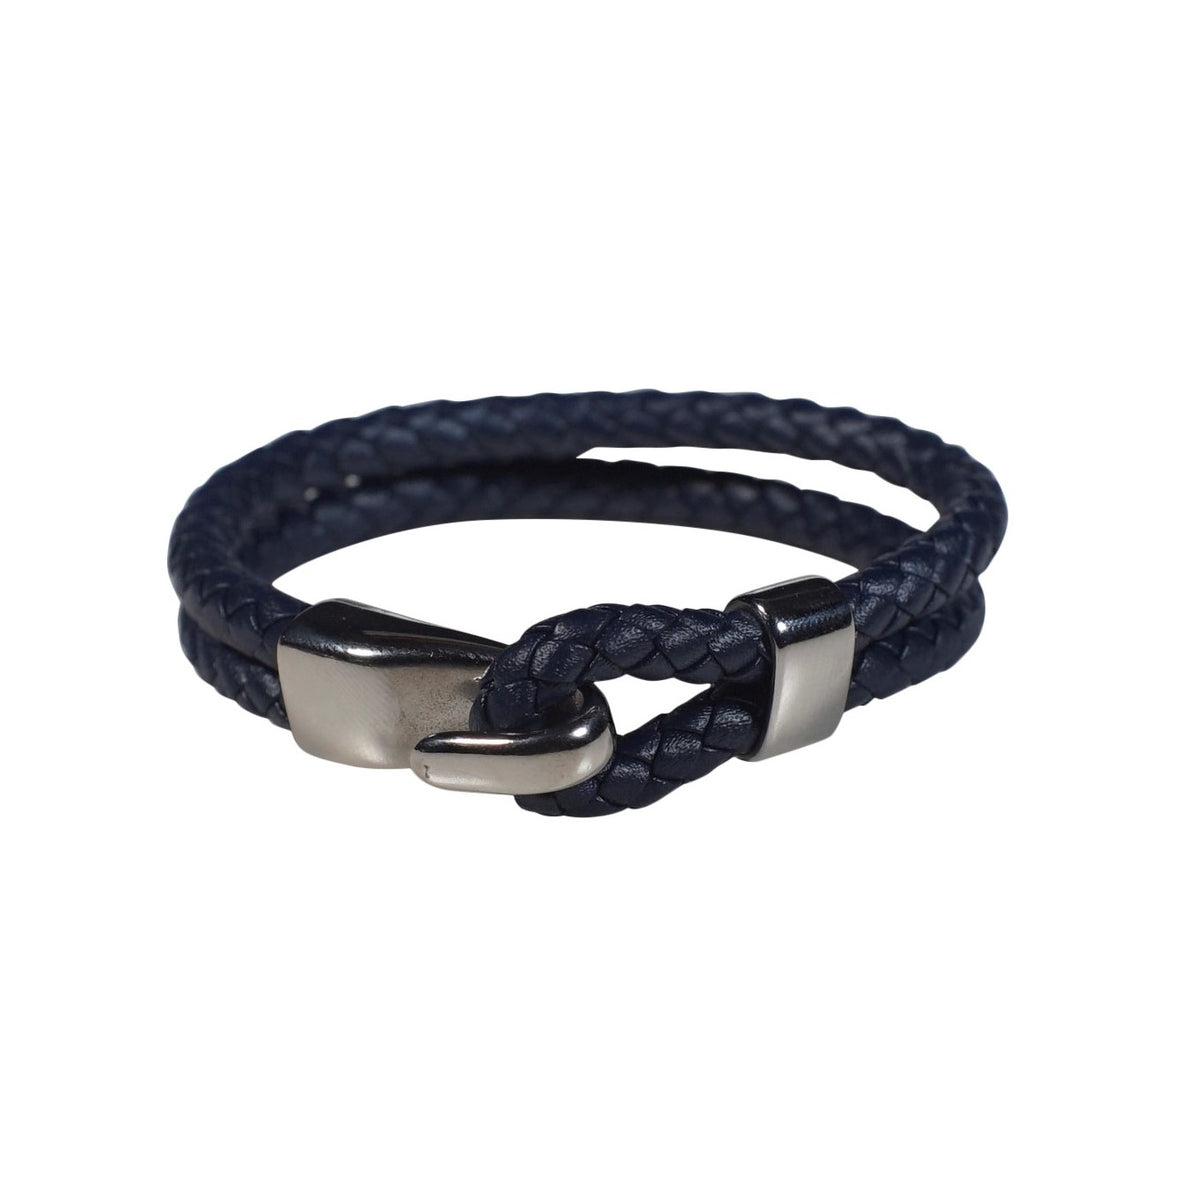 Oxford Leather Bracelet in Navy (Size M) - Nomad Watch Works Malaysia